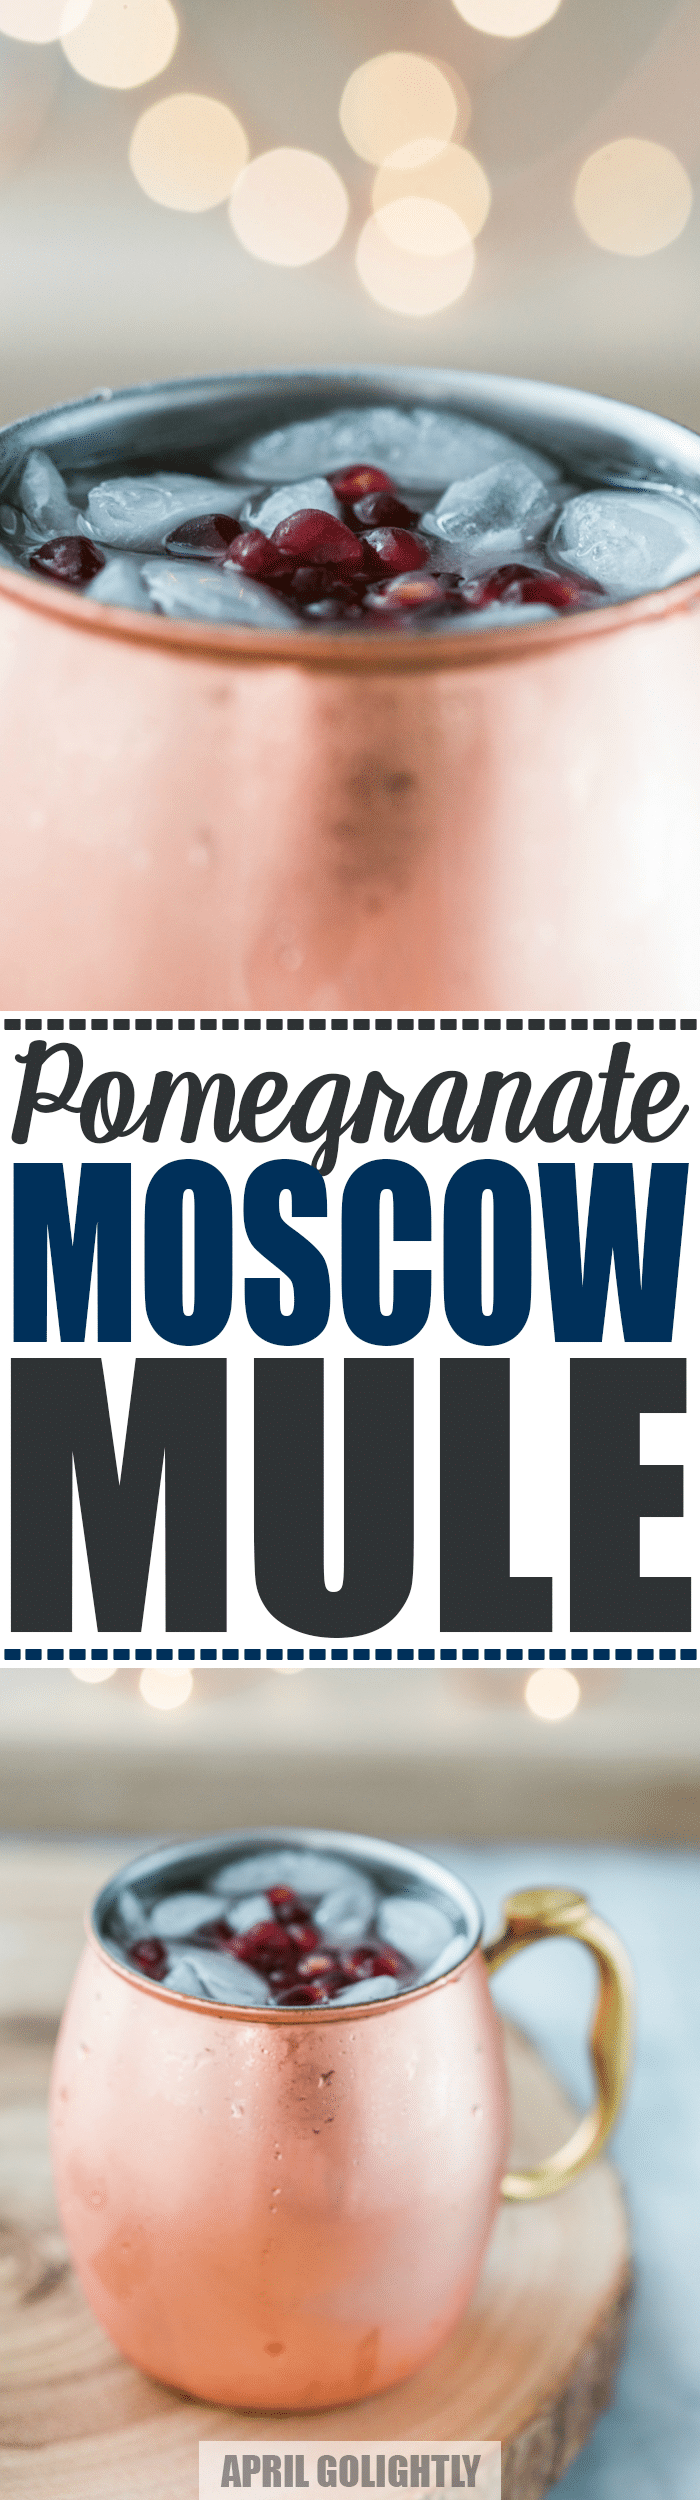 pomegranate-moscow-mule-3